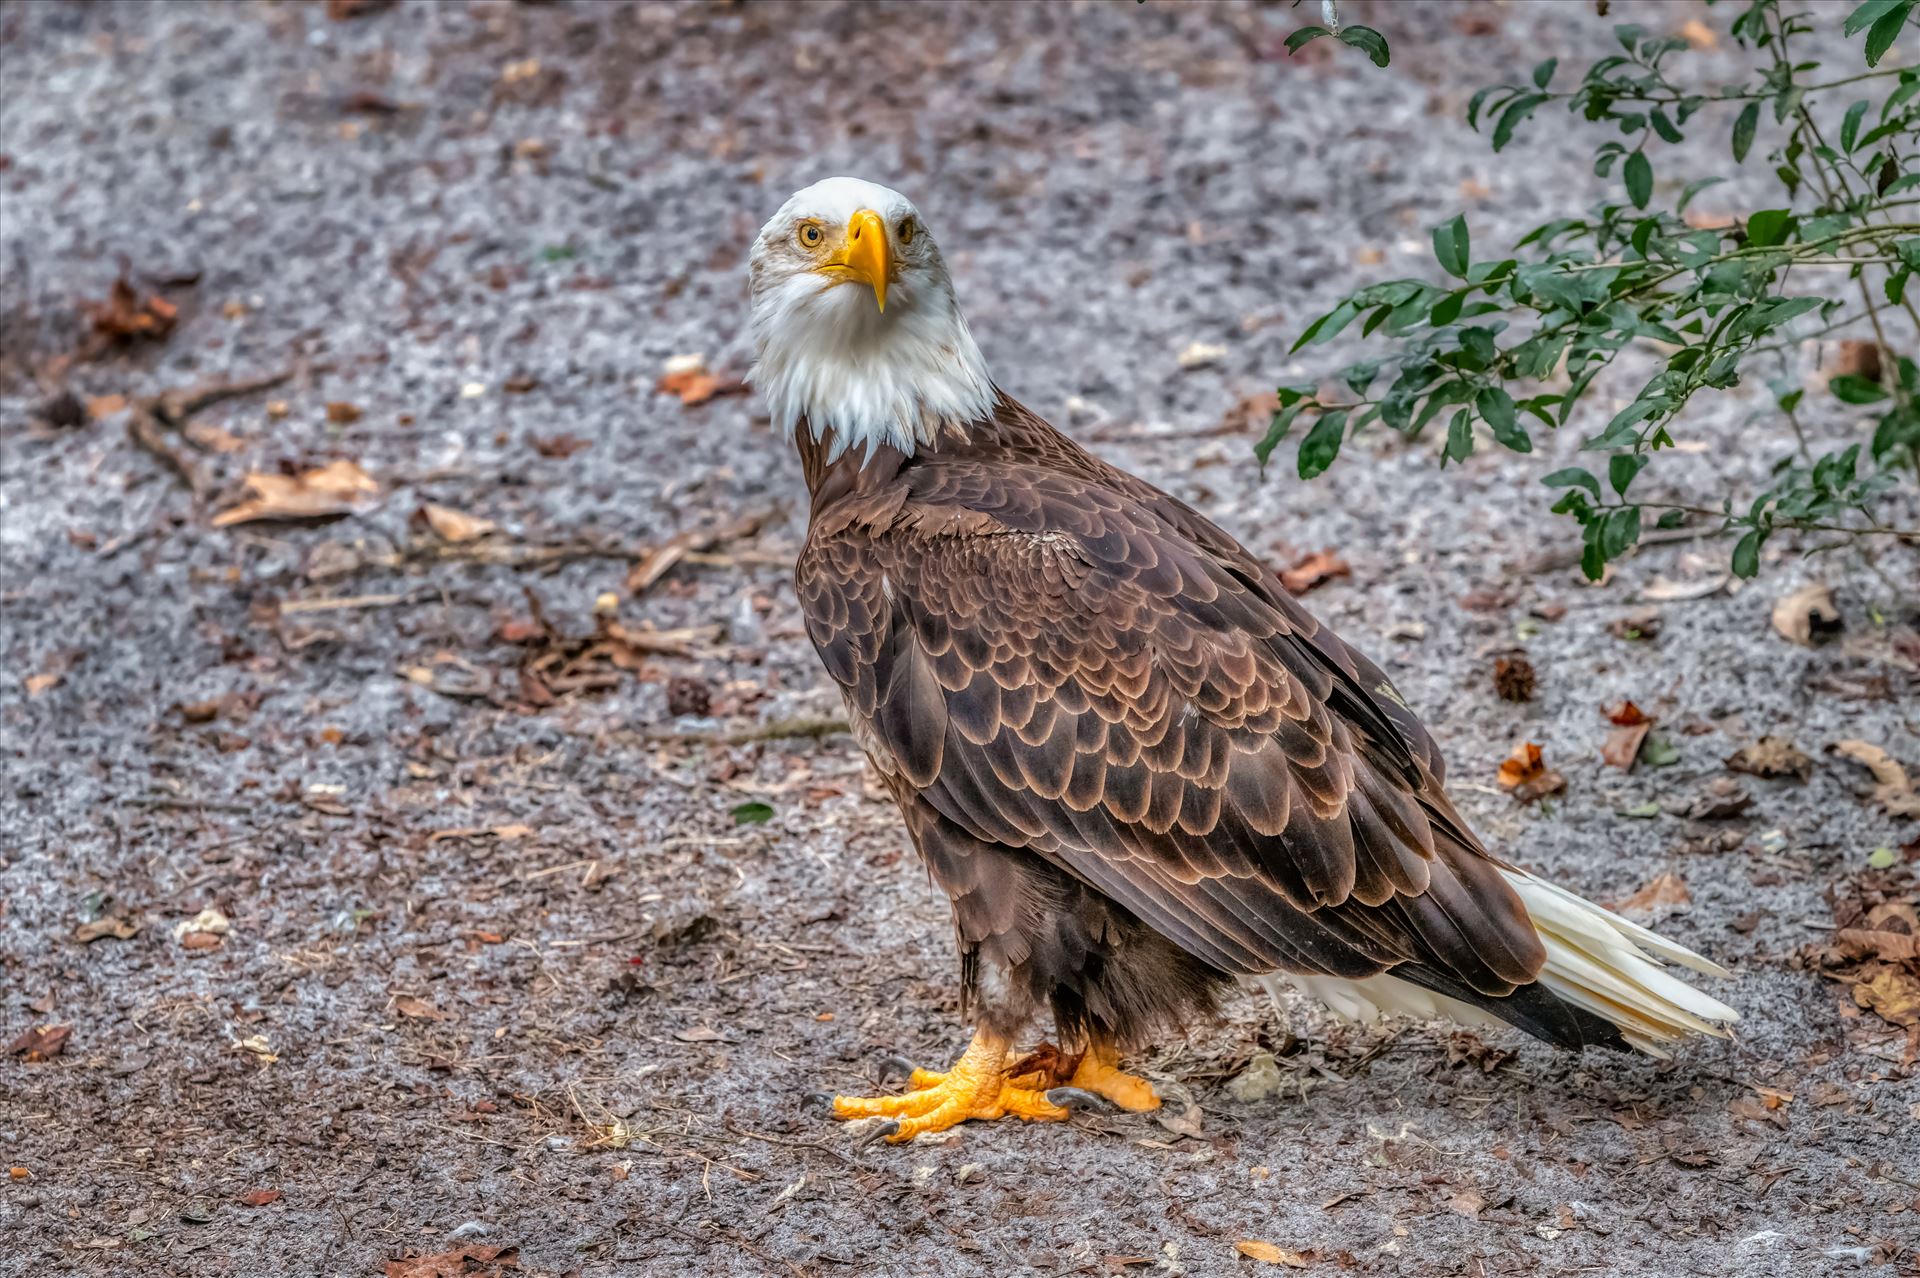 Bald Eagle Bald Eagle standing on the ground and looking back by Terry Kelly Photography